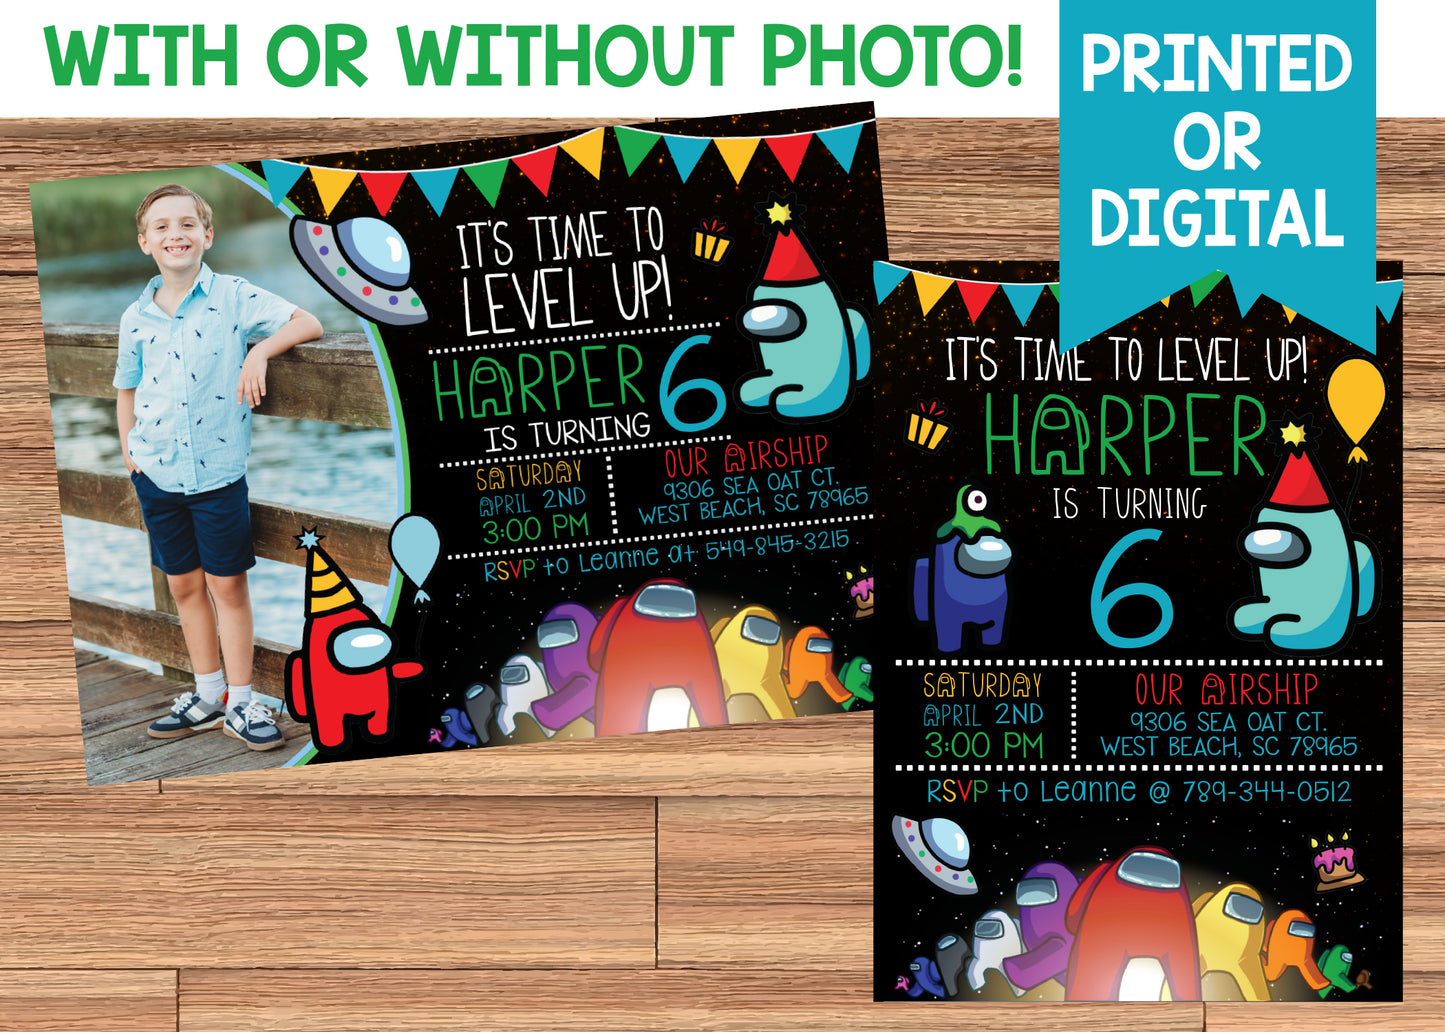 AMONG US Theme Birthday Party Invitation with or without Photo - Printed or Digital File!